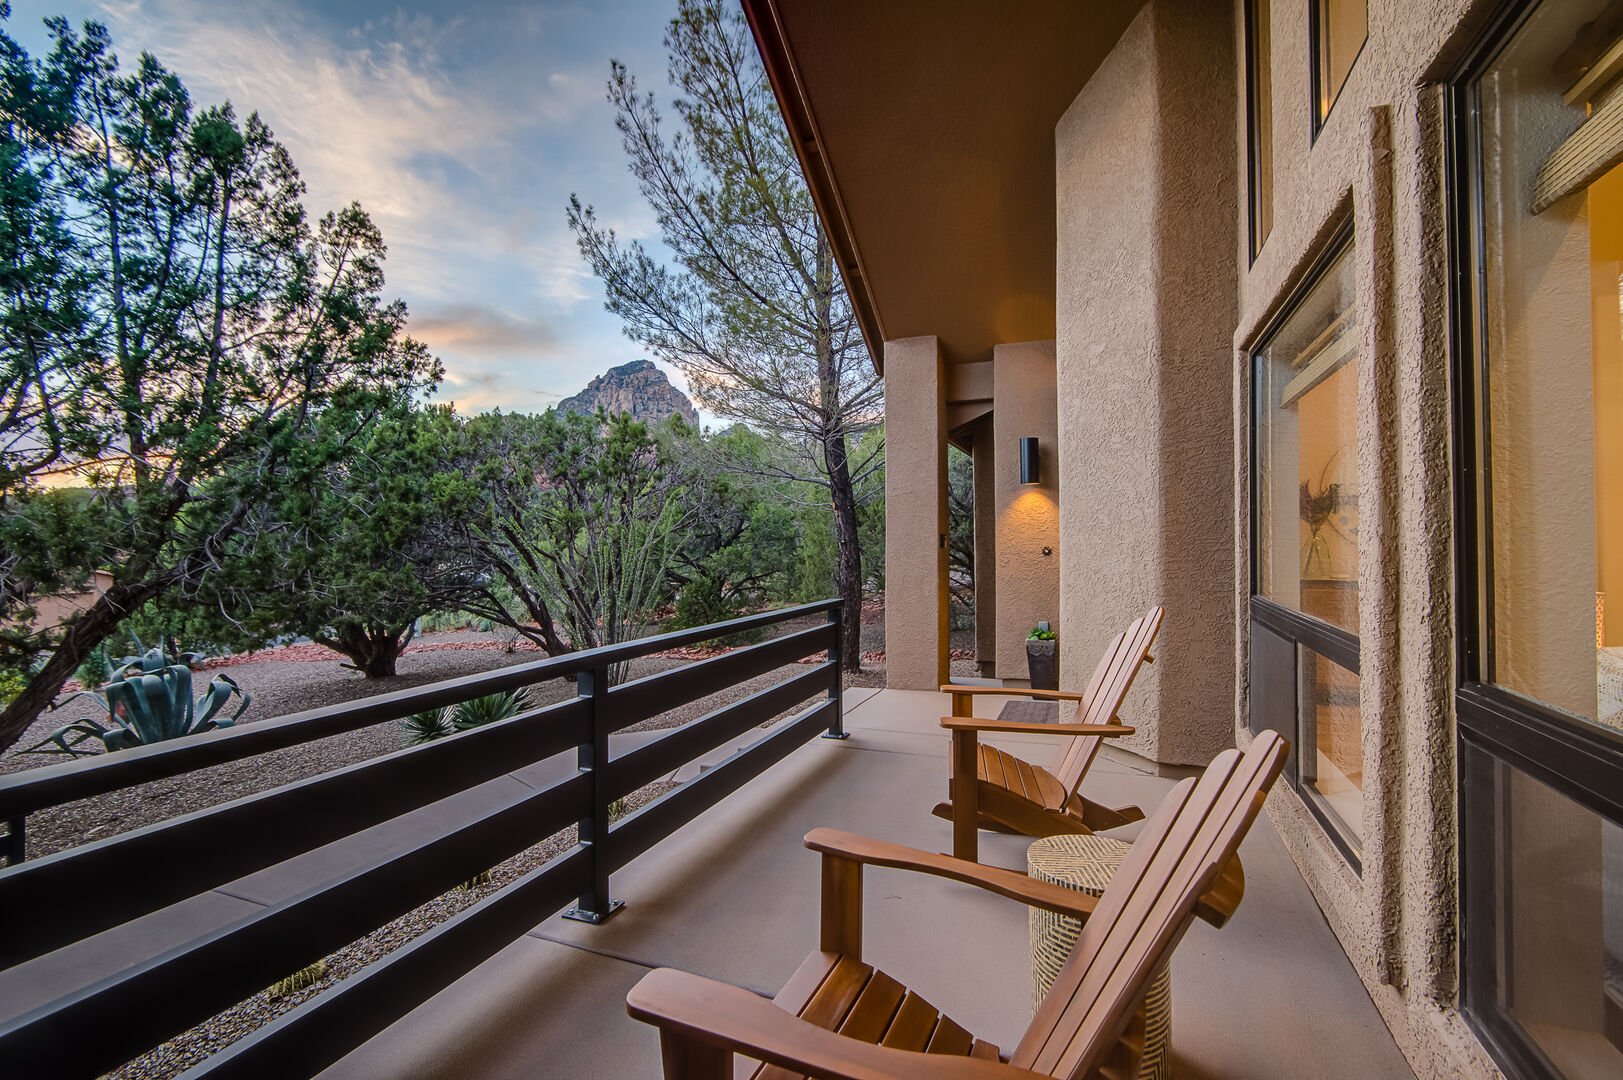 Enjoy Views of Thunder Mountain and Sugarloaf From the Front Porch!